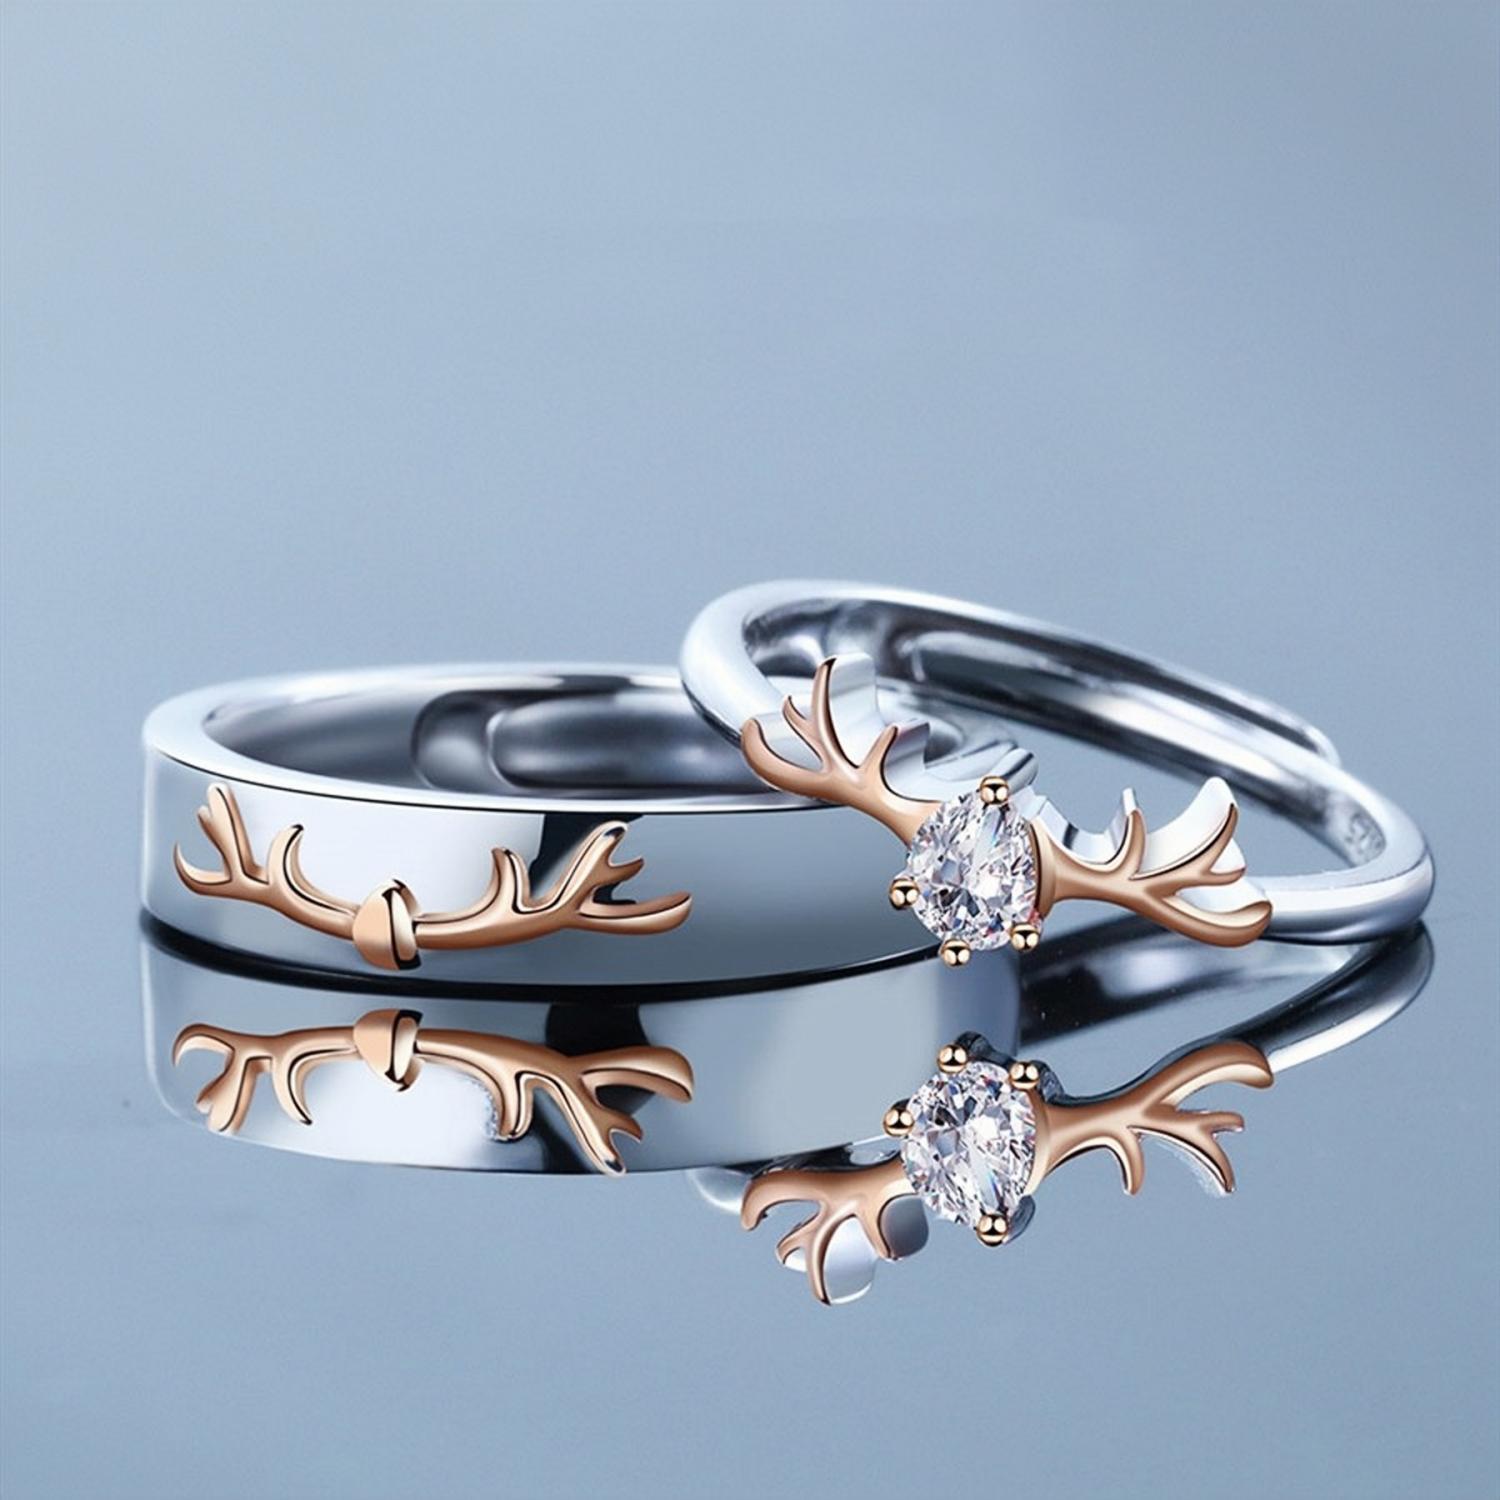 Adjustable Cute Elk Promise Rings For Couples In Sterling Silver - CoupleSets